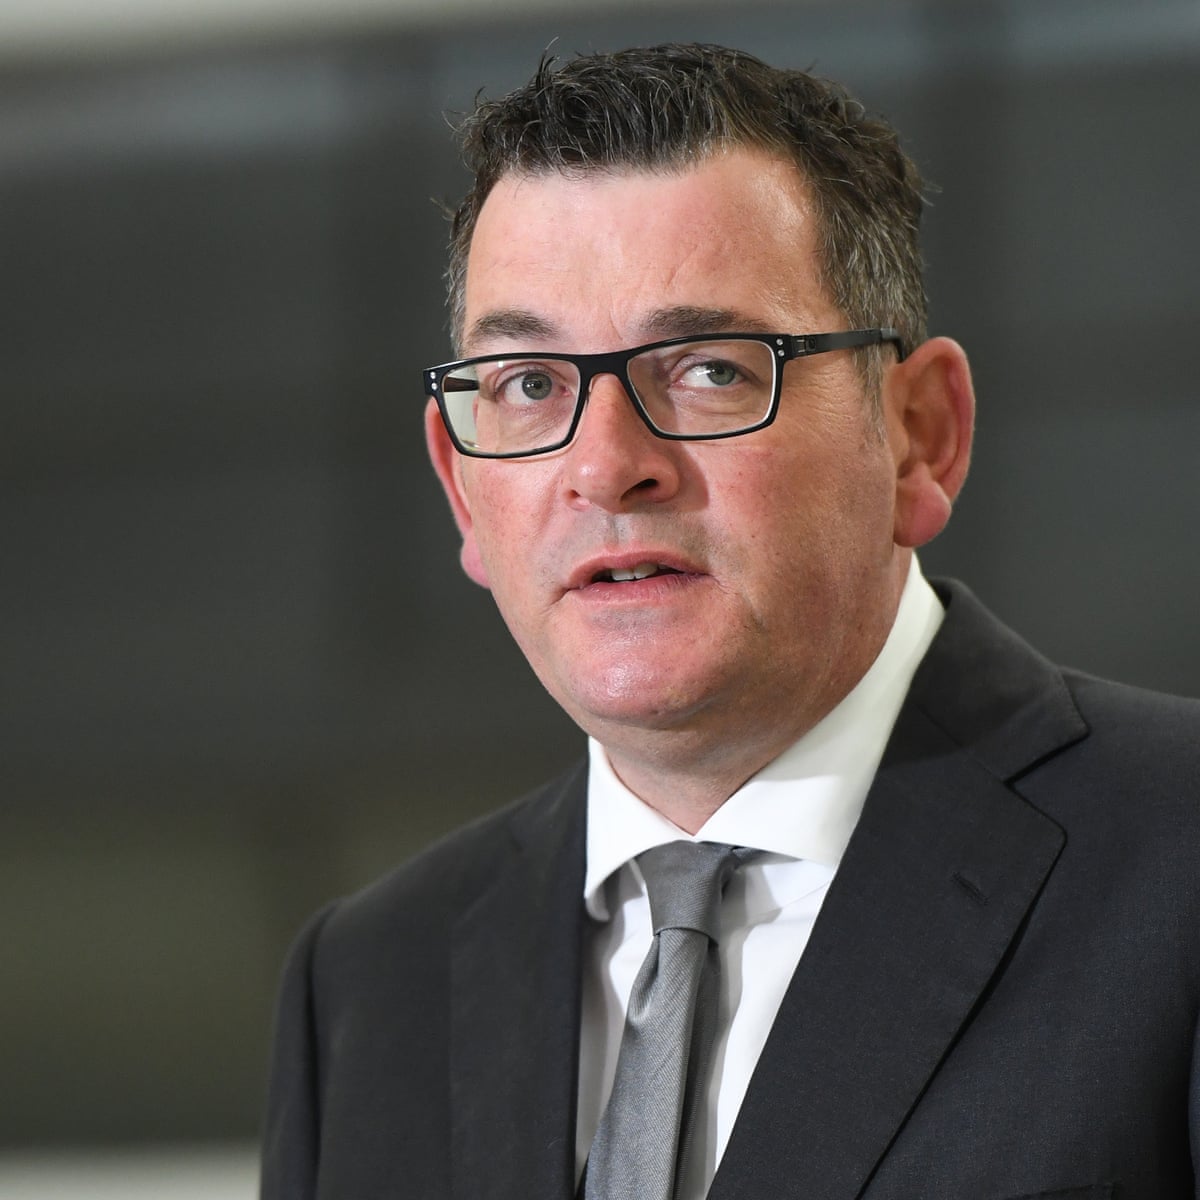 Premier Daniel Andrews Arrested: What Did He Do? Twitter Blows Hot Over Death Threats and Office Graffiti 